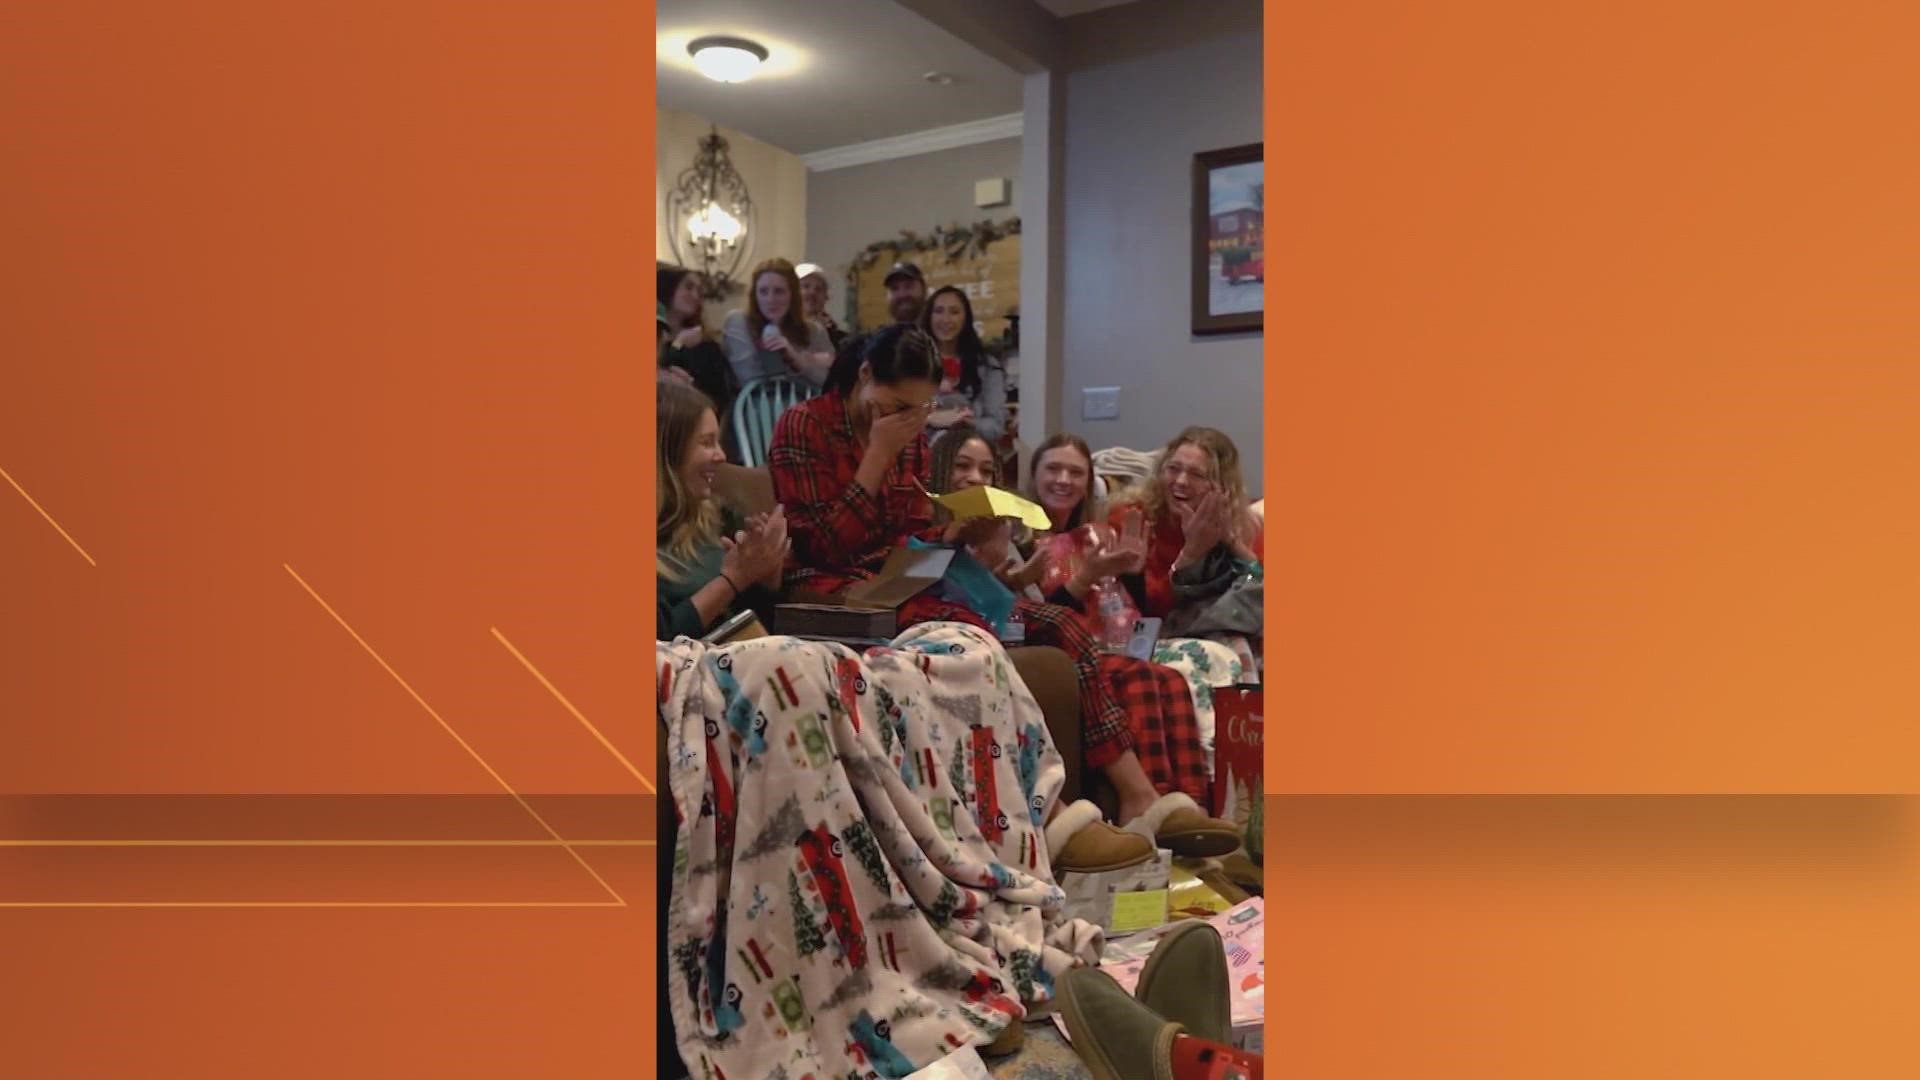 The sophomore San Antonio native was surprised by her team during the gift exchange.